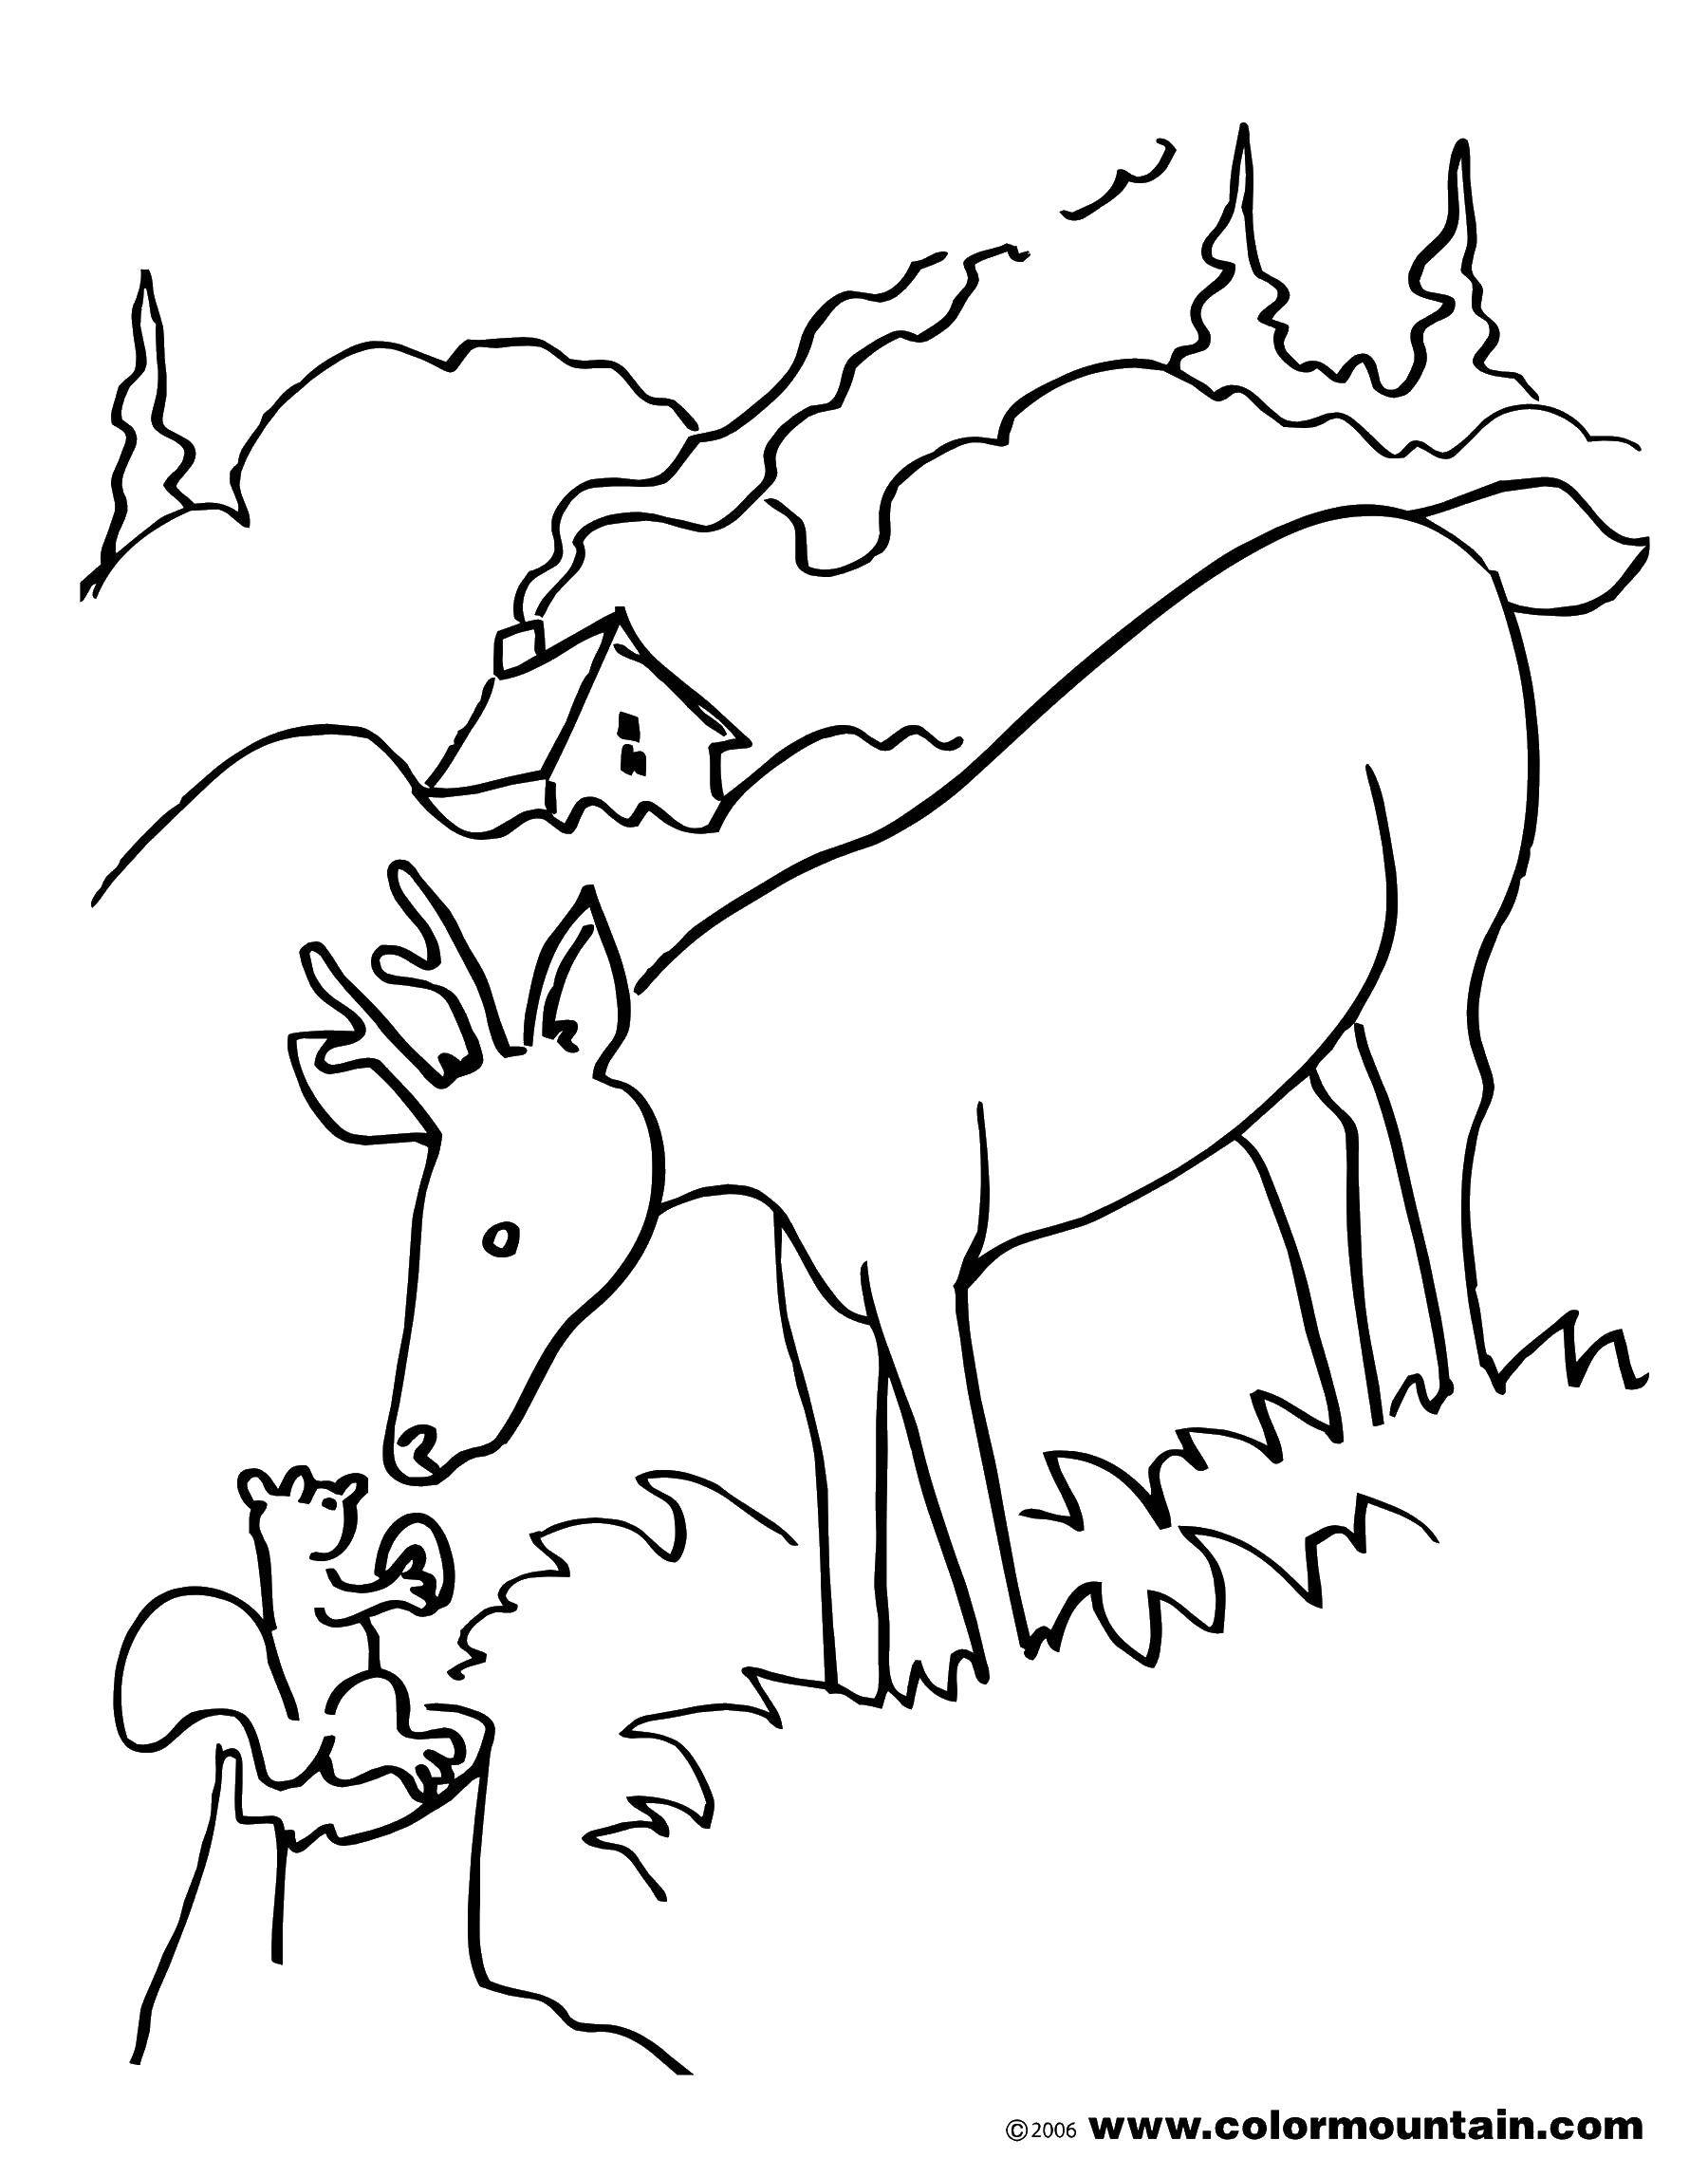 Coloring The squirrel and the moose. Category simple coloring. Tags:  squirrel, elk.